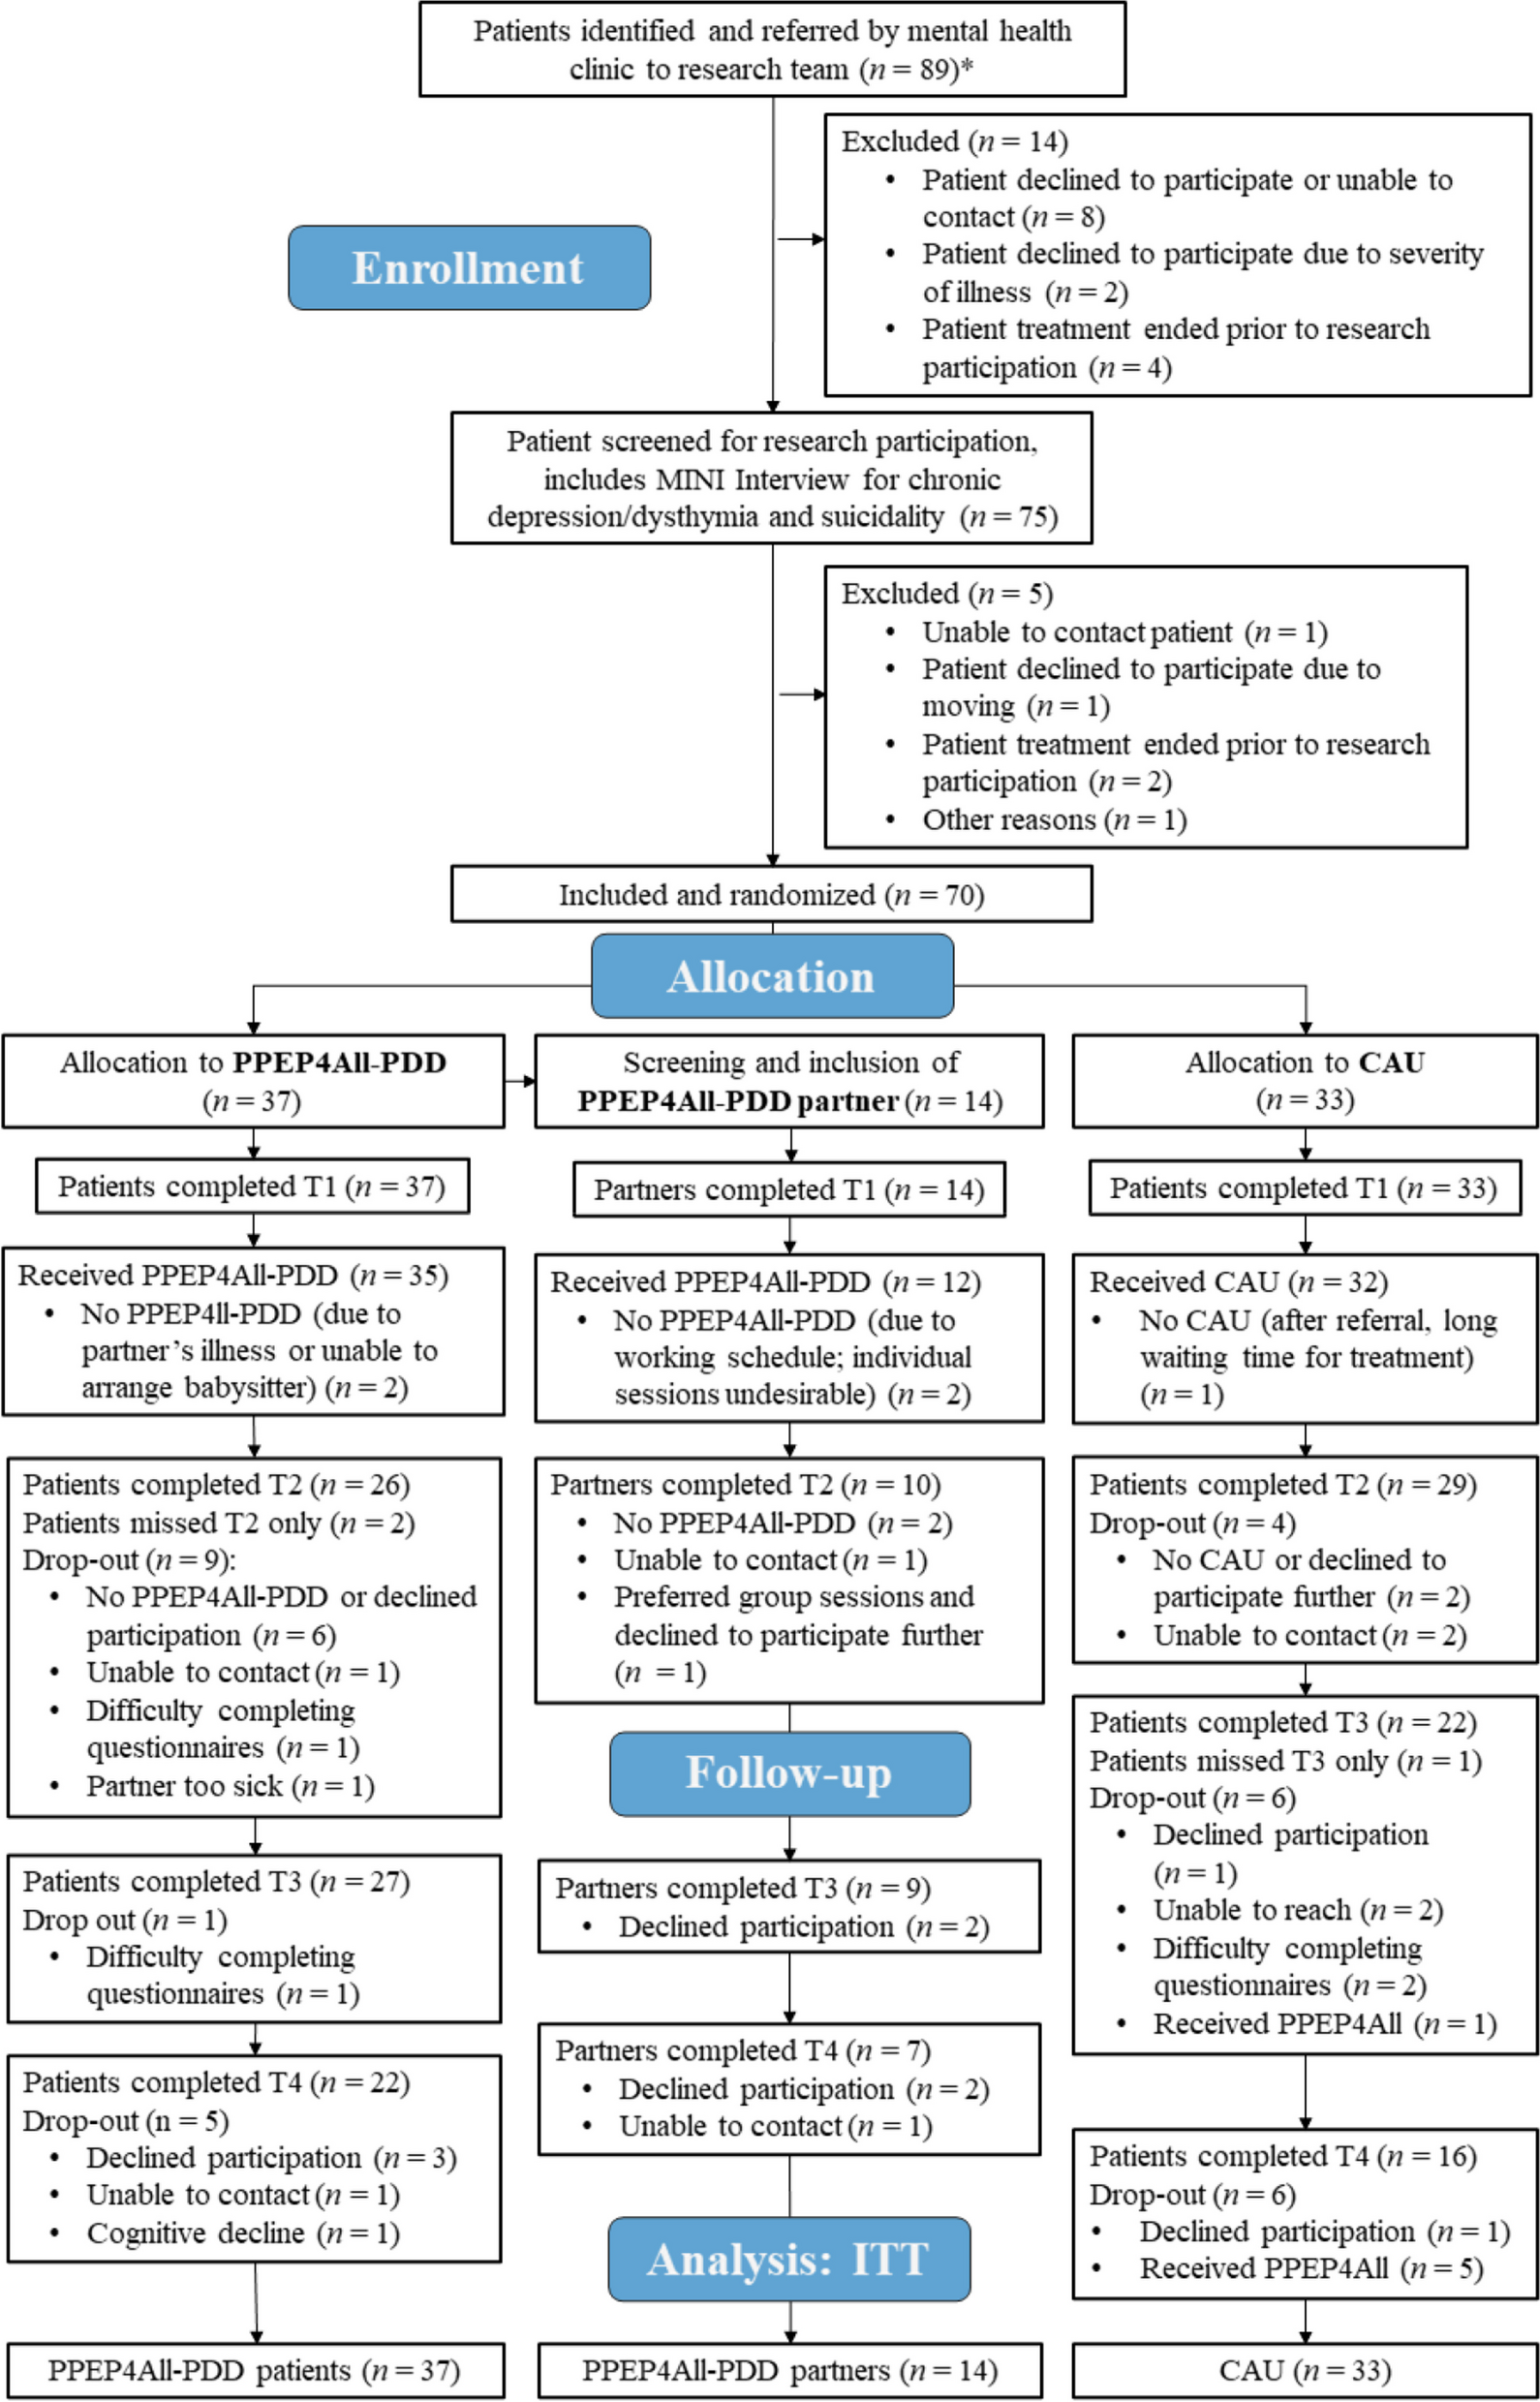 The clinical effectiveness of a self-management intervention for patients with persistent depressive disorder and their partners/caregivers: results from a multicenter, pragmatic randomized controlled trial